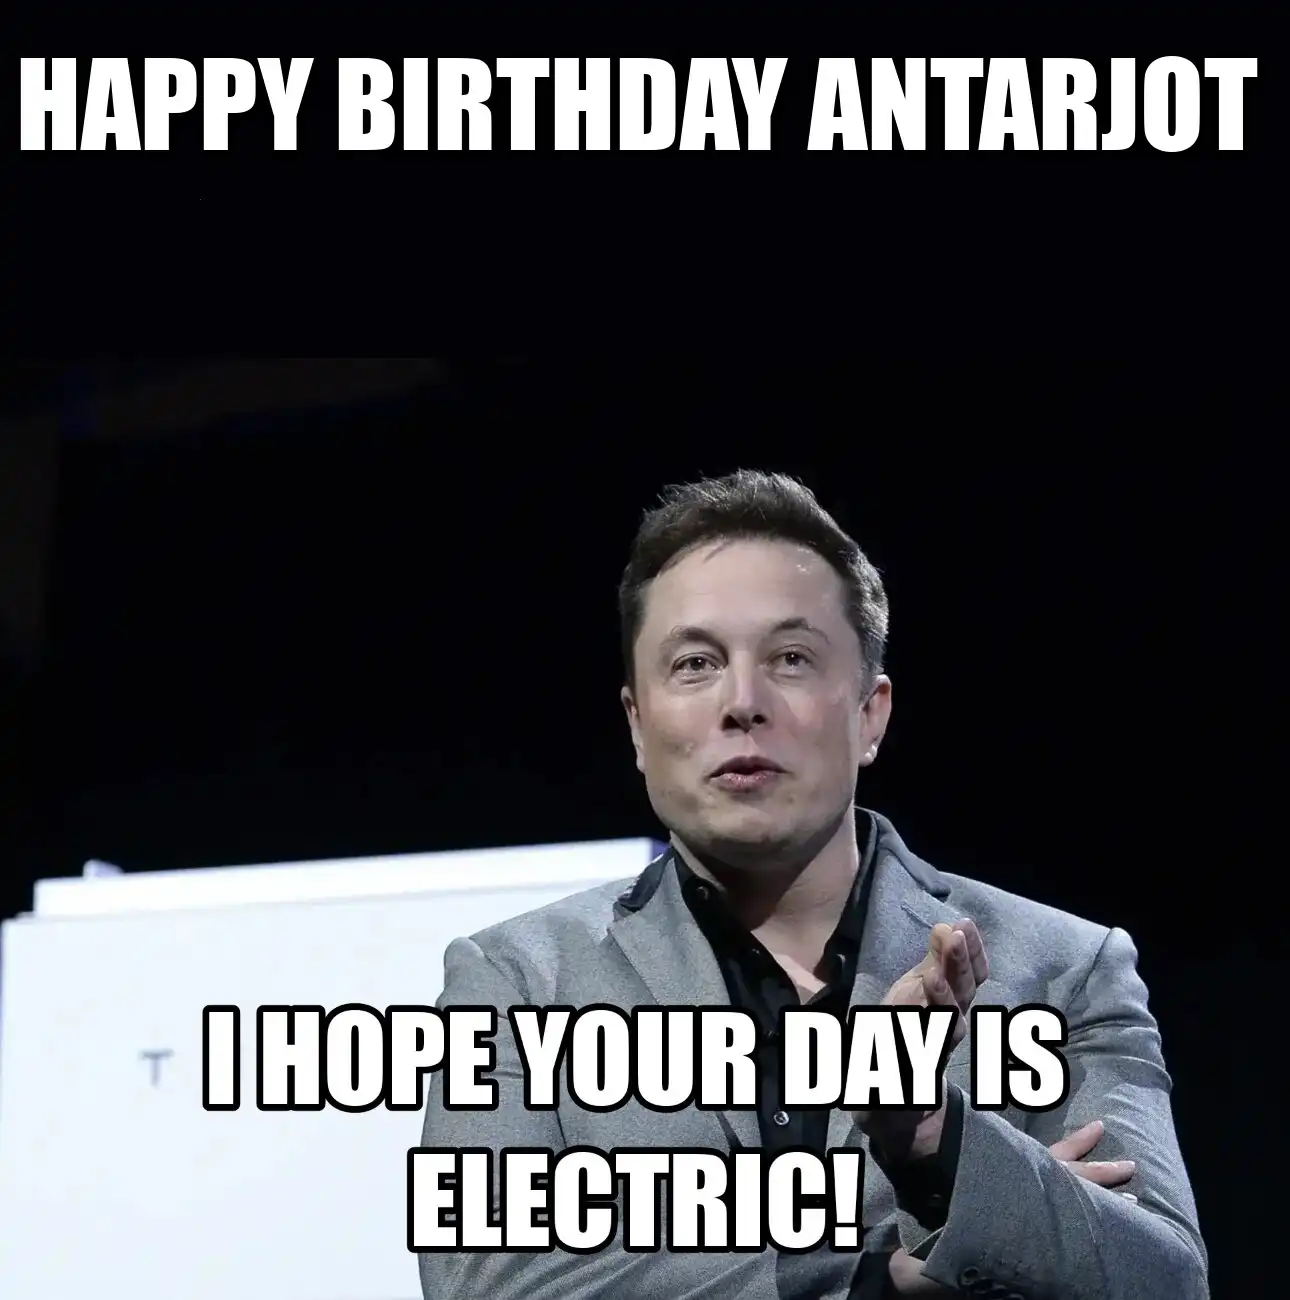 Happy Birthday Antarjot I Hope Your Day Is Electric Meme